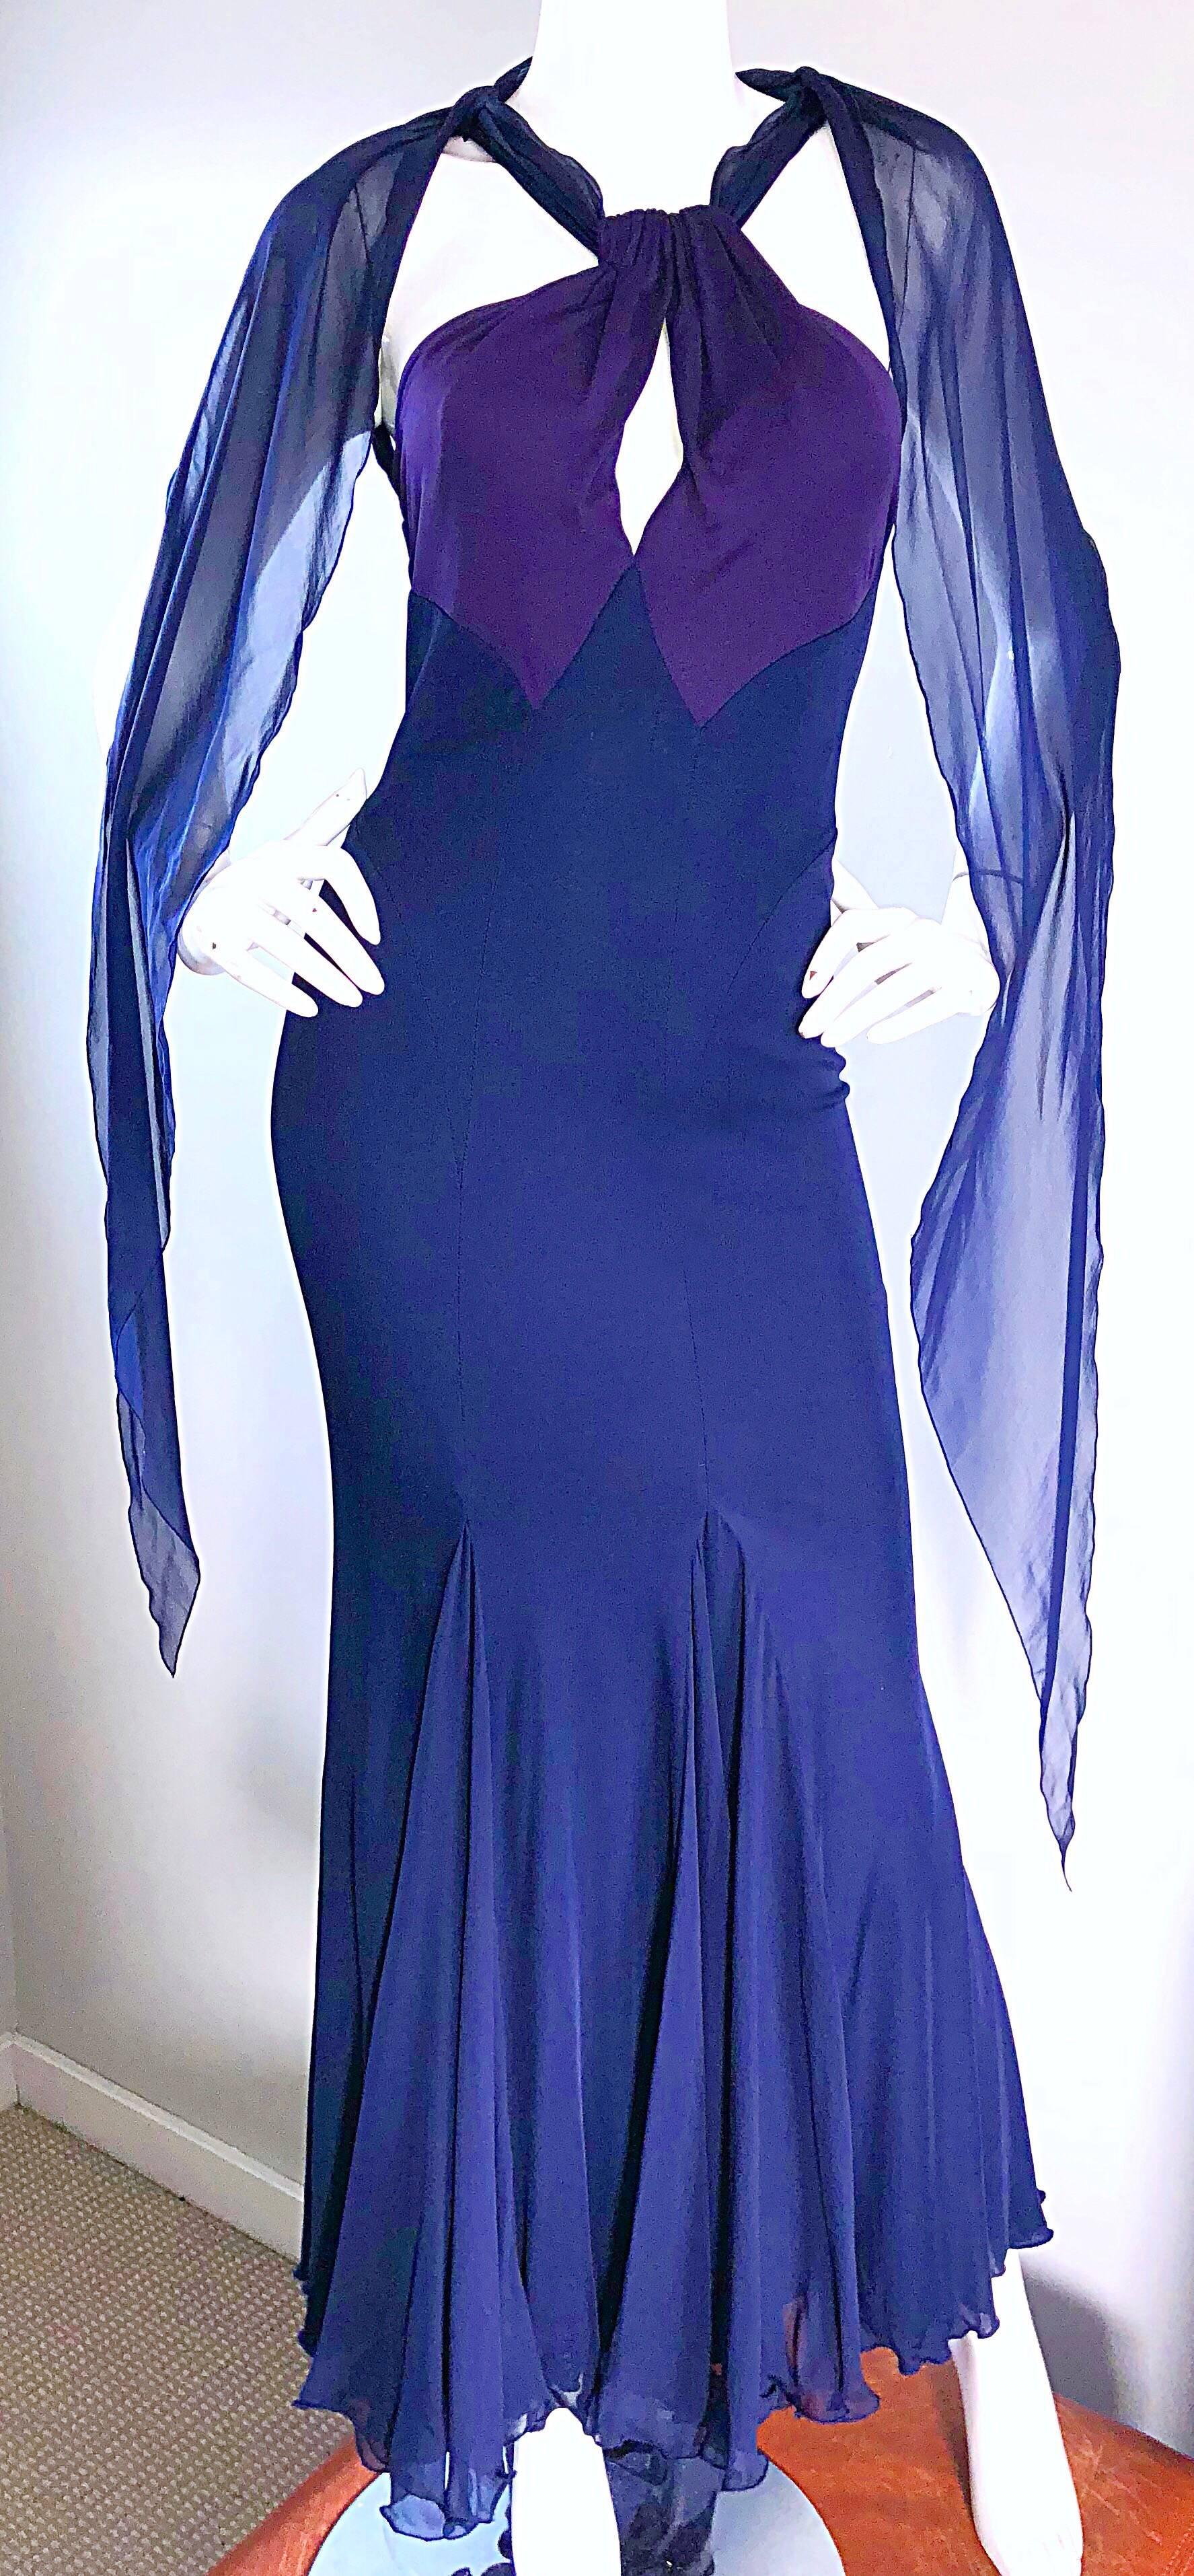 Gorgeous 1990s / 90s BILL BLASS original sample grecian inspired color block evening dress! Features a slinky silk jersey that stretches to fit. Purple bodice, with keyhole cut-out at center bust, and navy skirt. Navy blue chiffon ties at the back